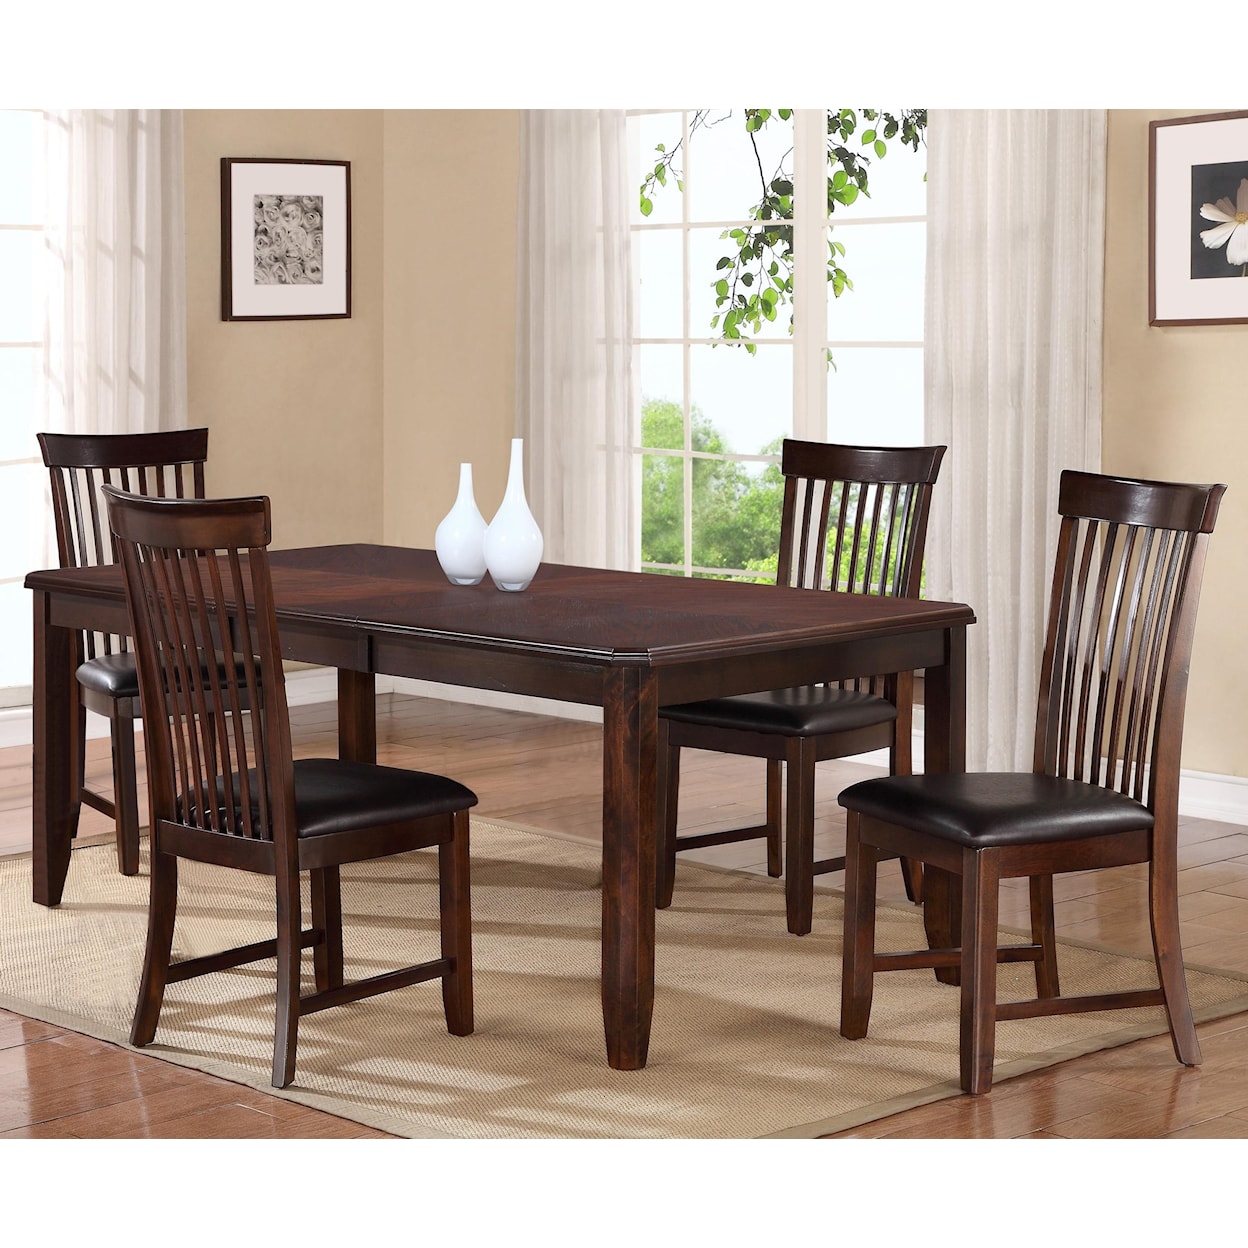 Holland House 19003 5-Piece Dining Table Set